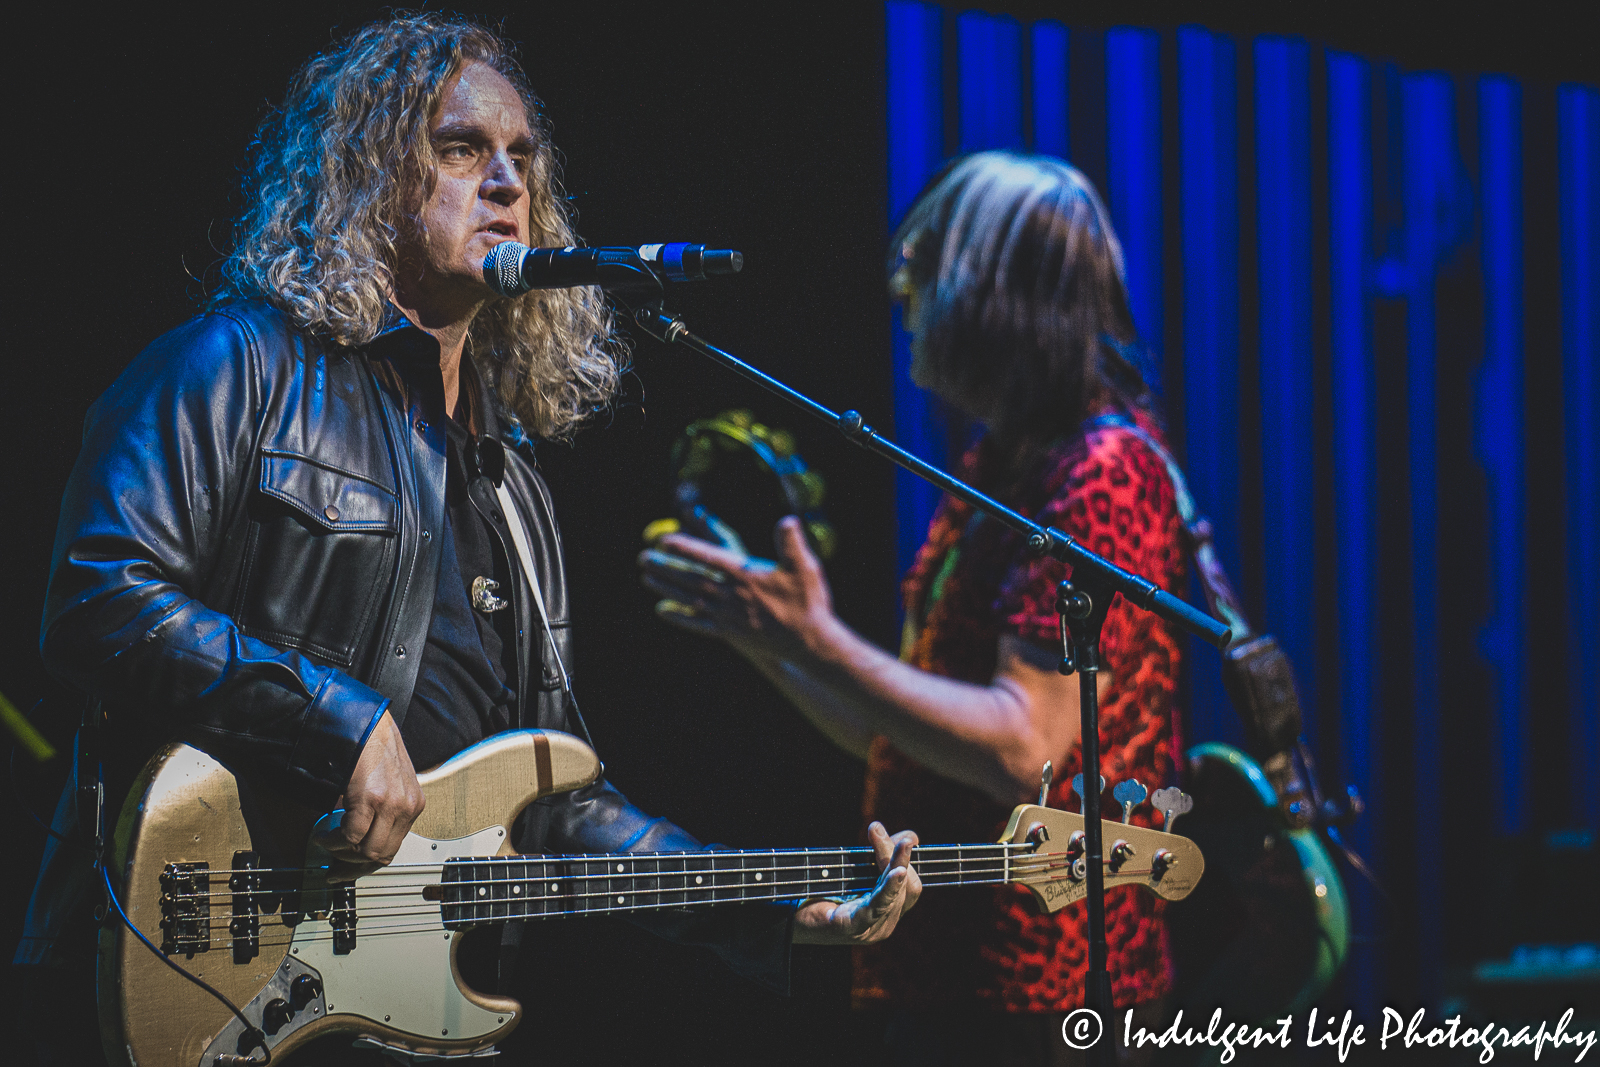 Former Chicago lead singer Jason Scheff performing live with Todd Rundgren at the Kauffman Center in downtown Kansas City, MO on March 27, 2022.